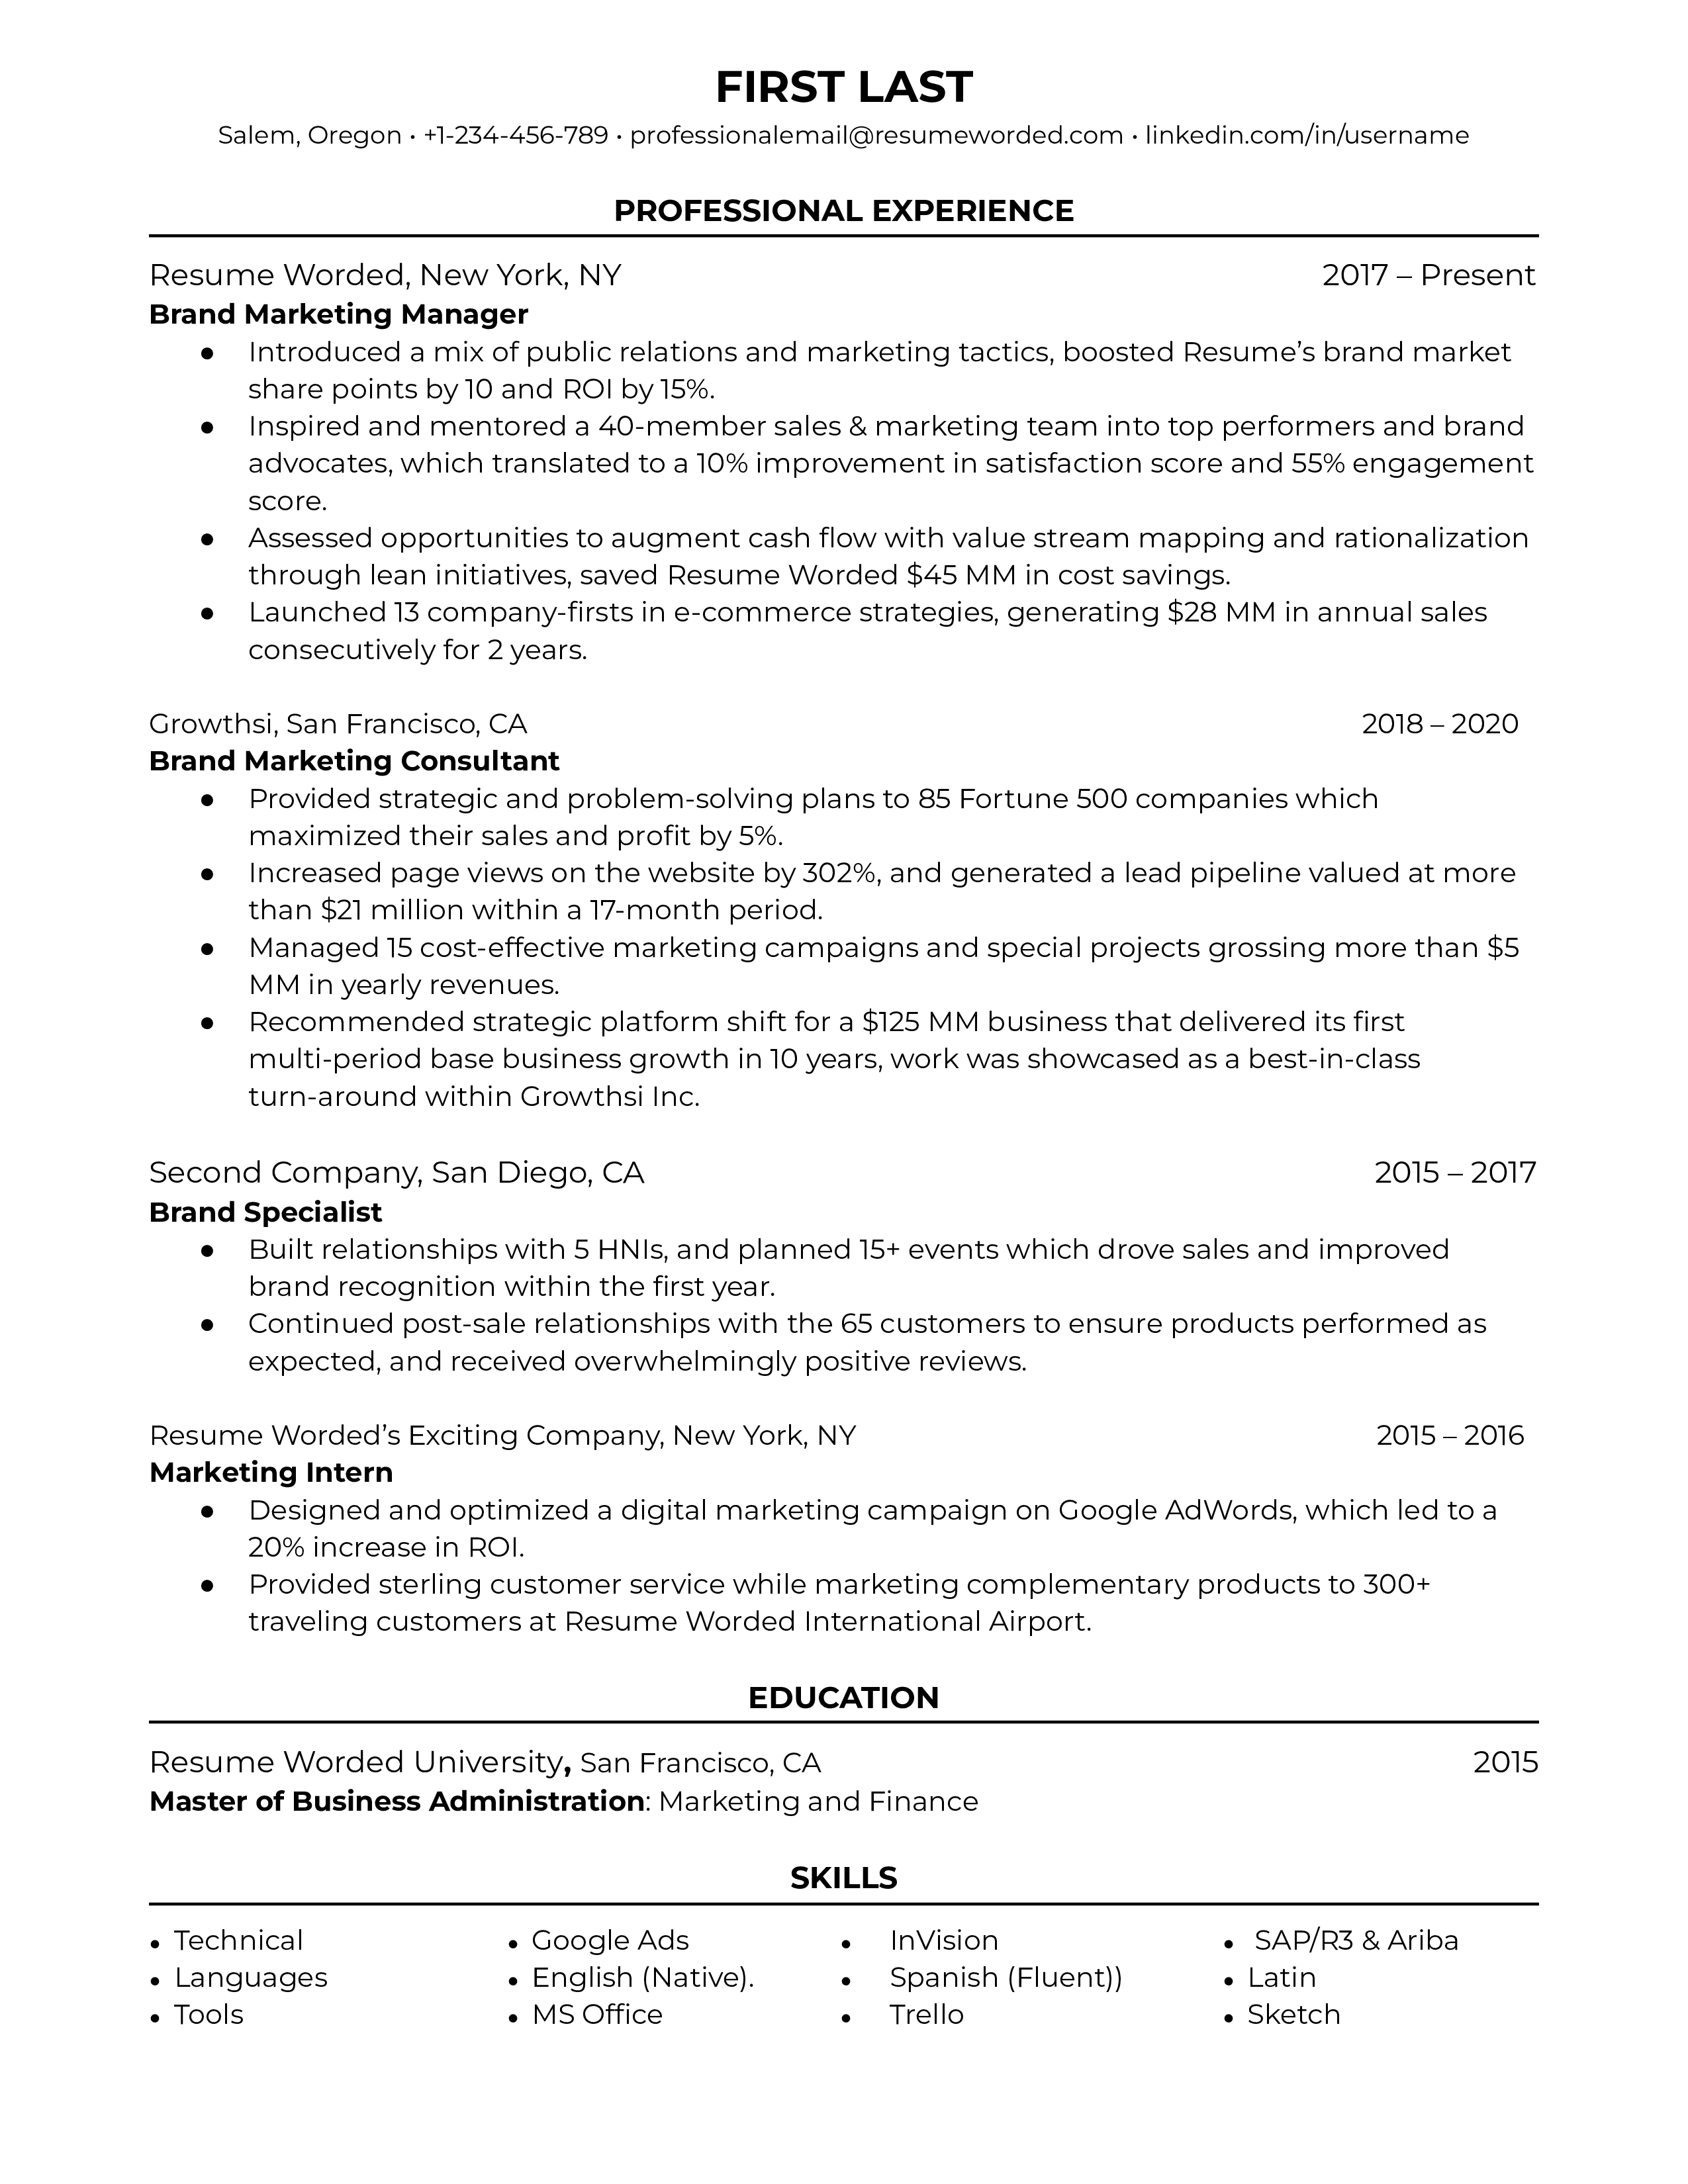 Brand Marketing Manager Resume Template + Example